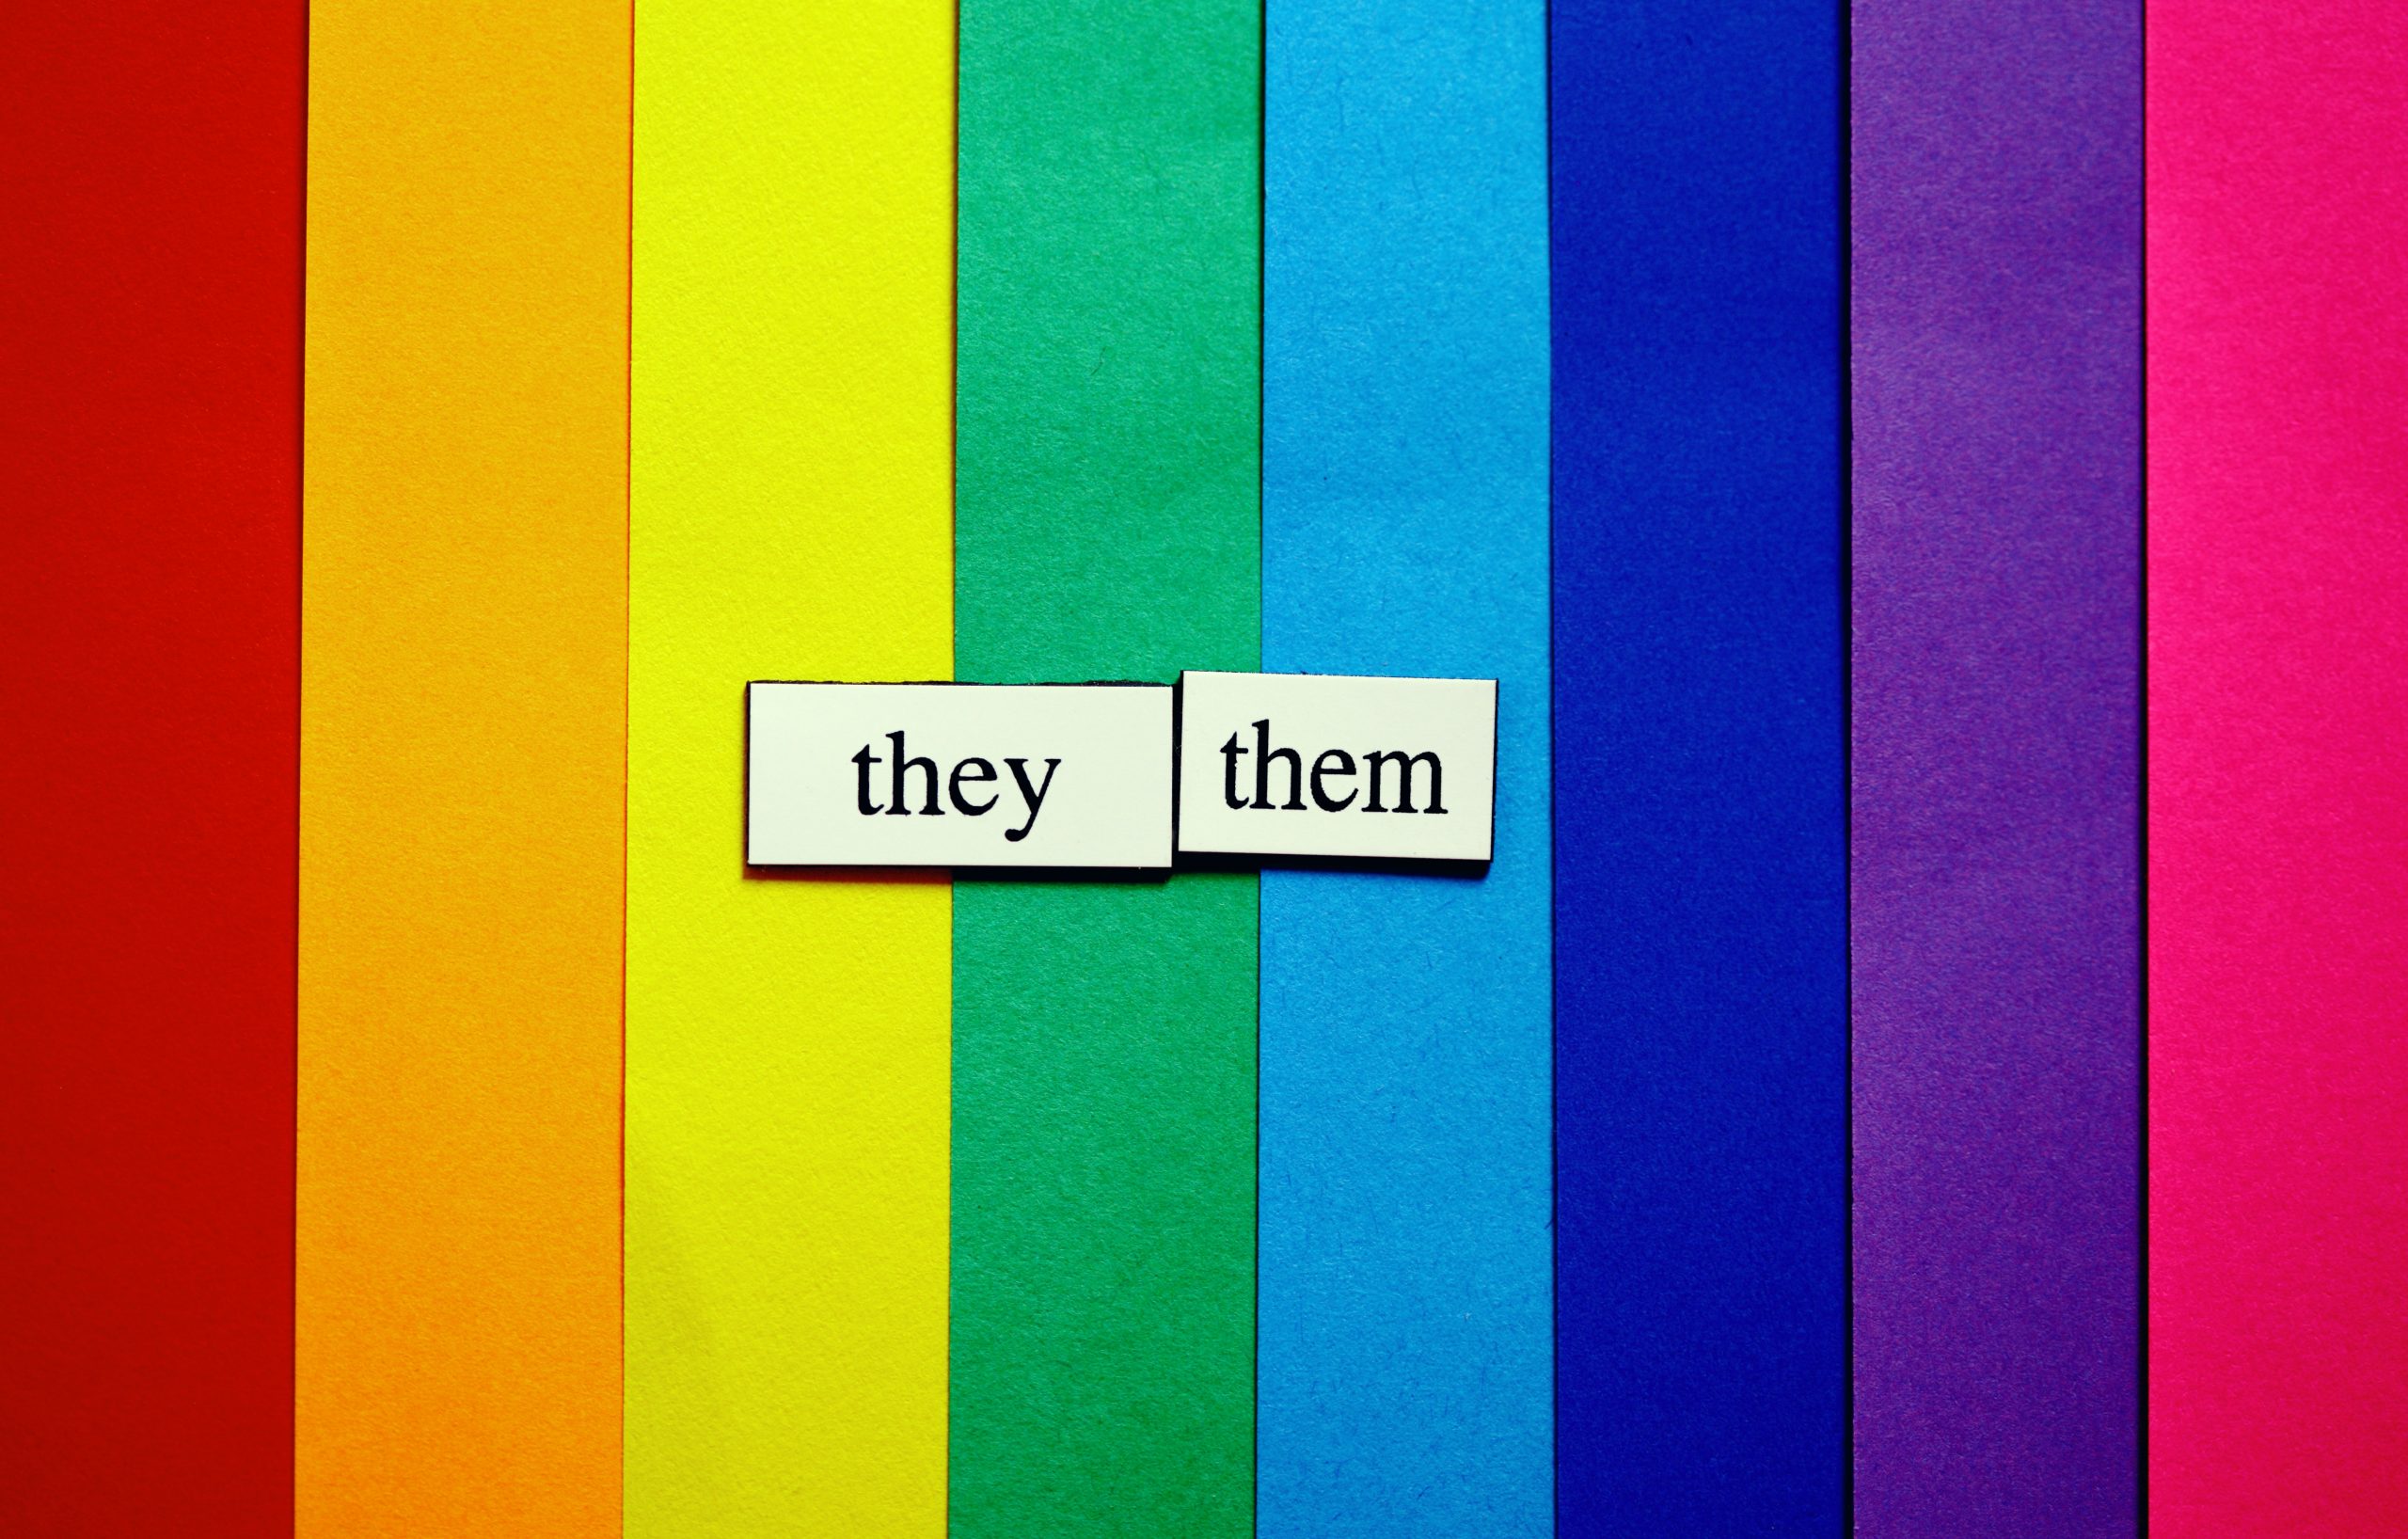 Tips to use the non-binary pronouns: they, them, ze, hir, and more!